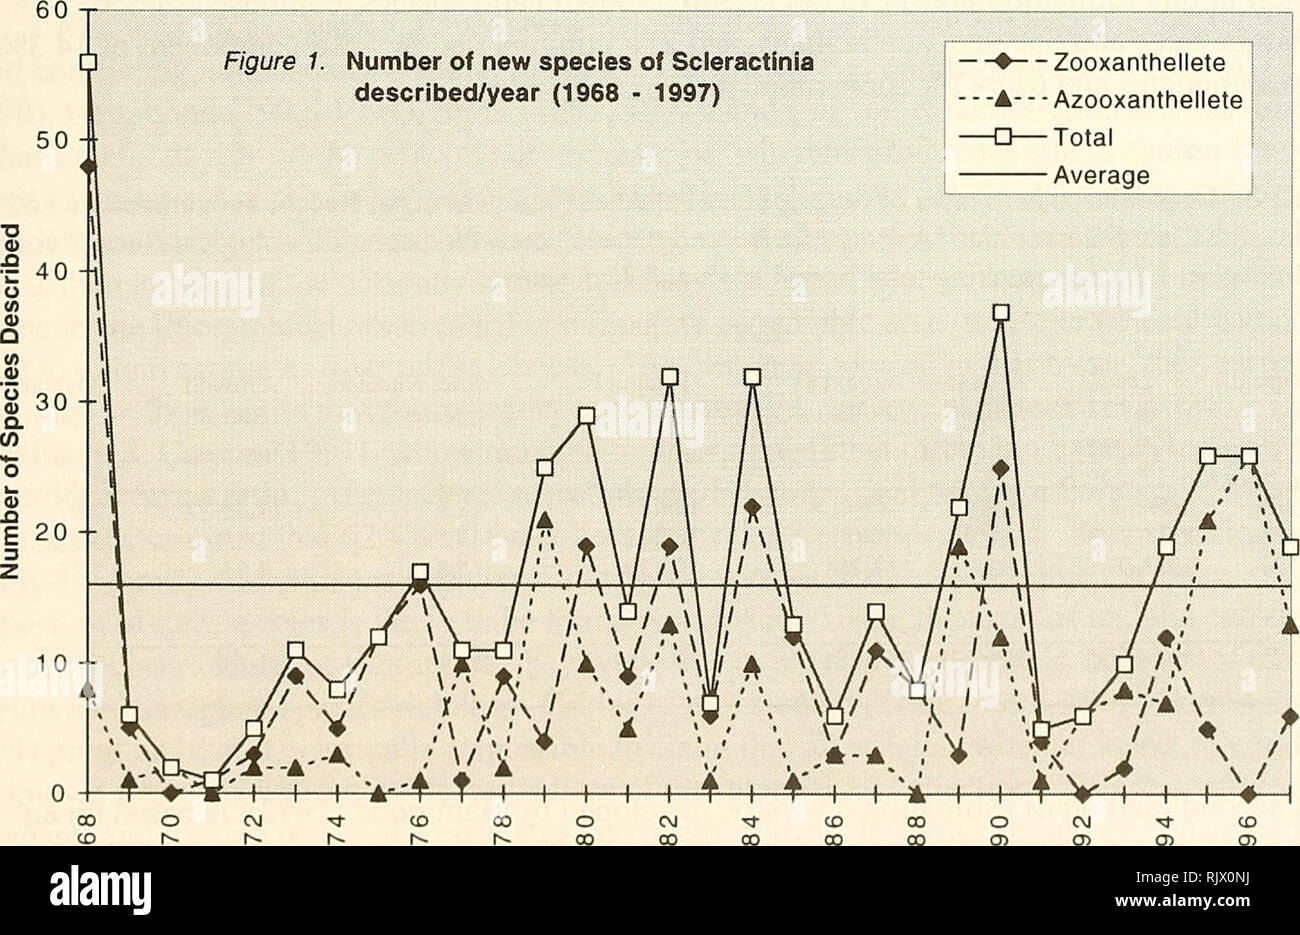 . Atoll research bulletin. Coral reefs and islands; Marine biology; Marine sciences. RATES OF NEW SPECIES DESCRIPTIONS Over the last 30.5 years (1968 to mid-1998) the rate of description of new species of Scleractinia has been very uneven (Figure 1), reflecting the aperiodic publication of major faunistic revisions. (No judgment of the validity of these newly described species is made herein.) In this time interval, 490 species were described, or an average of 16.1 species per year. The uneveness of the yearly description totals is reflected in a range of 1-56 and a rather high standard deviat Stock Photo